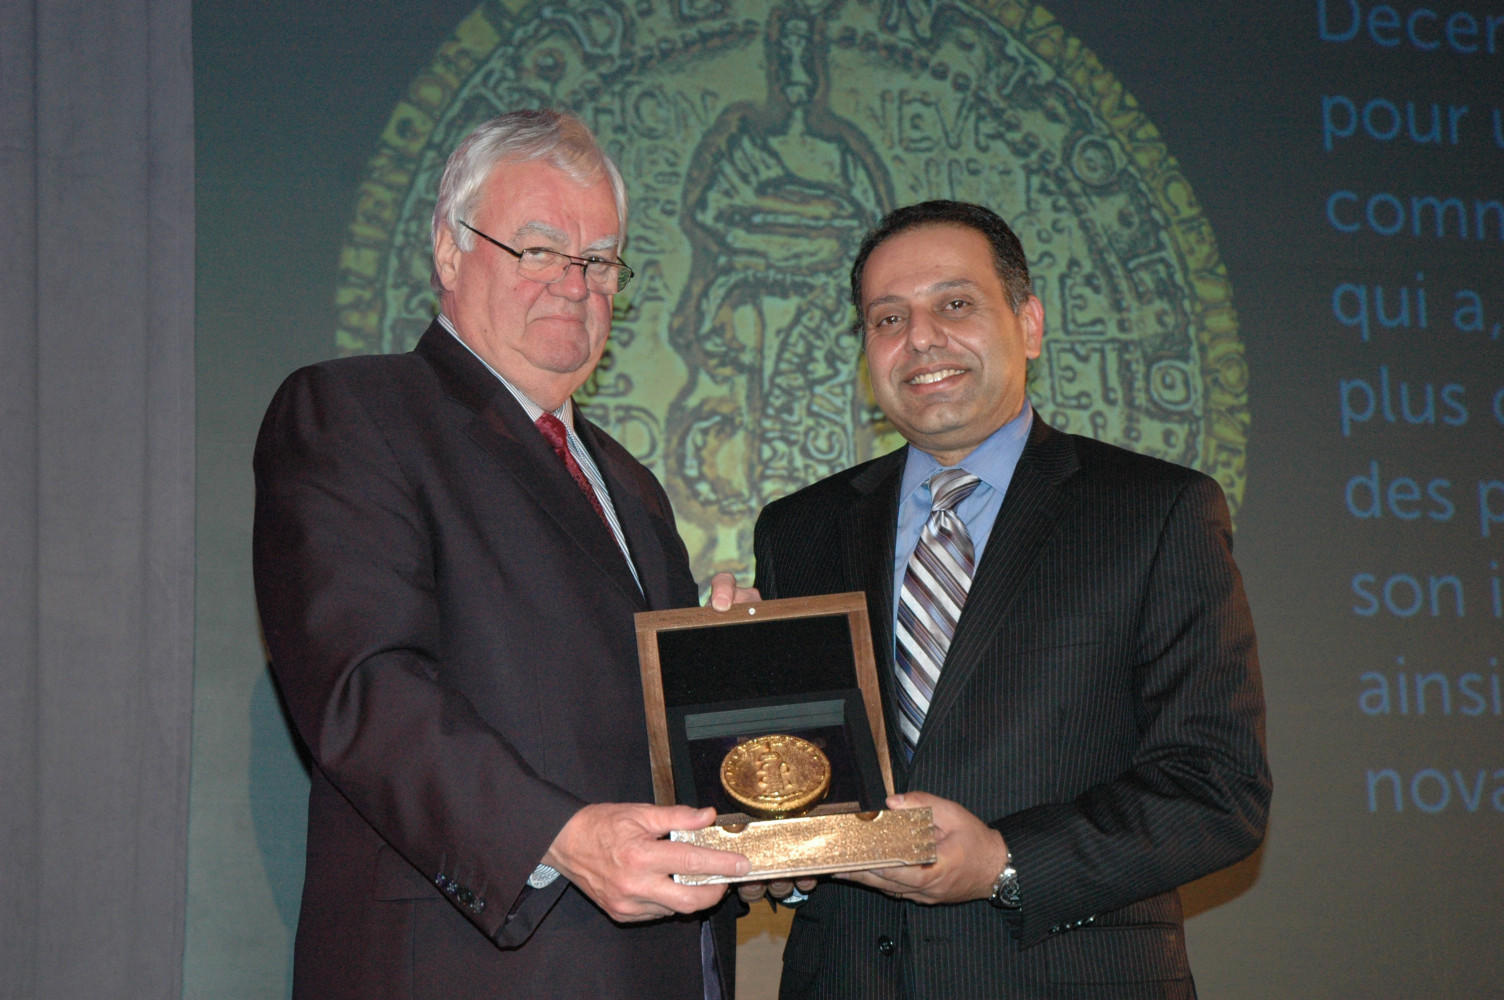 2013 - Dr. Awny Farajallah, Vice-President, Medical, Bristol-Myers Squibb Canada accepts
the award from Dr. Jacques Gagné, President of the Jury of Prix Galien Canada